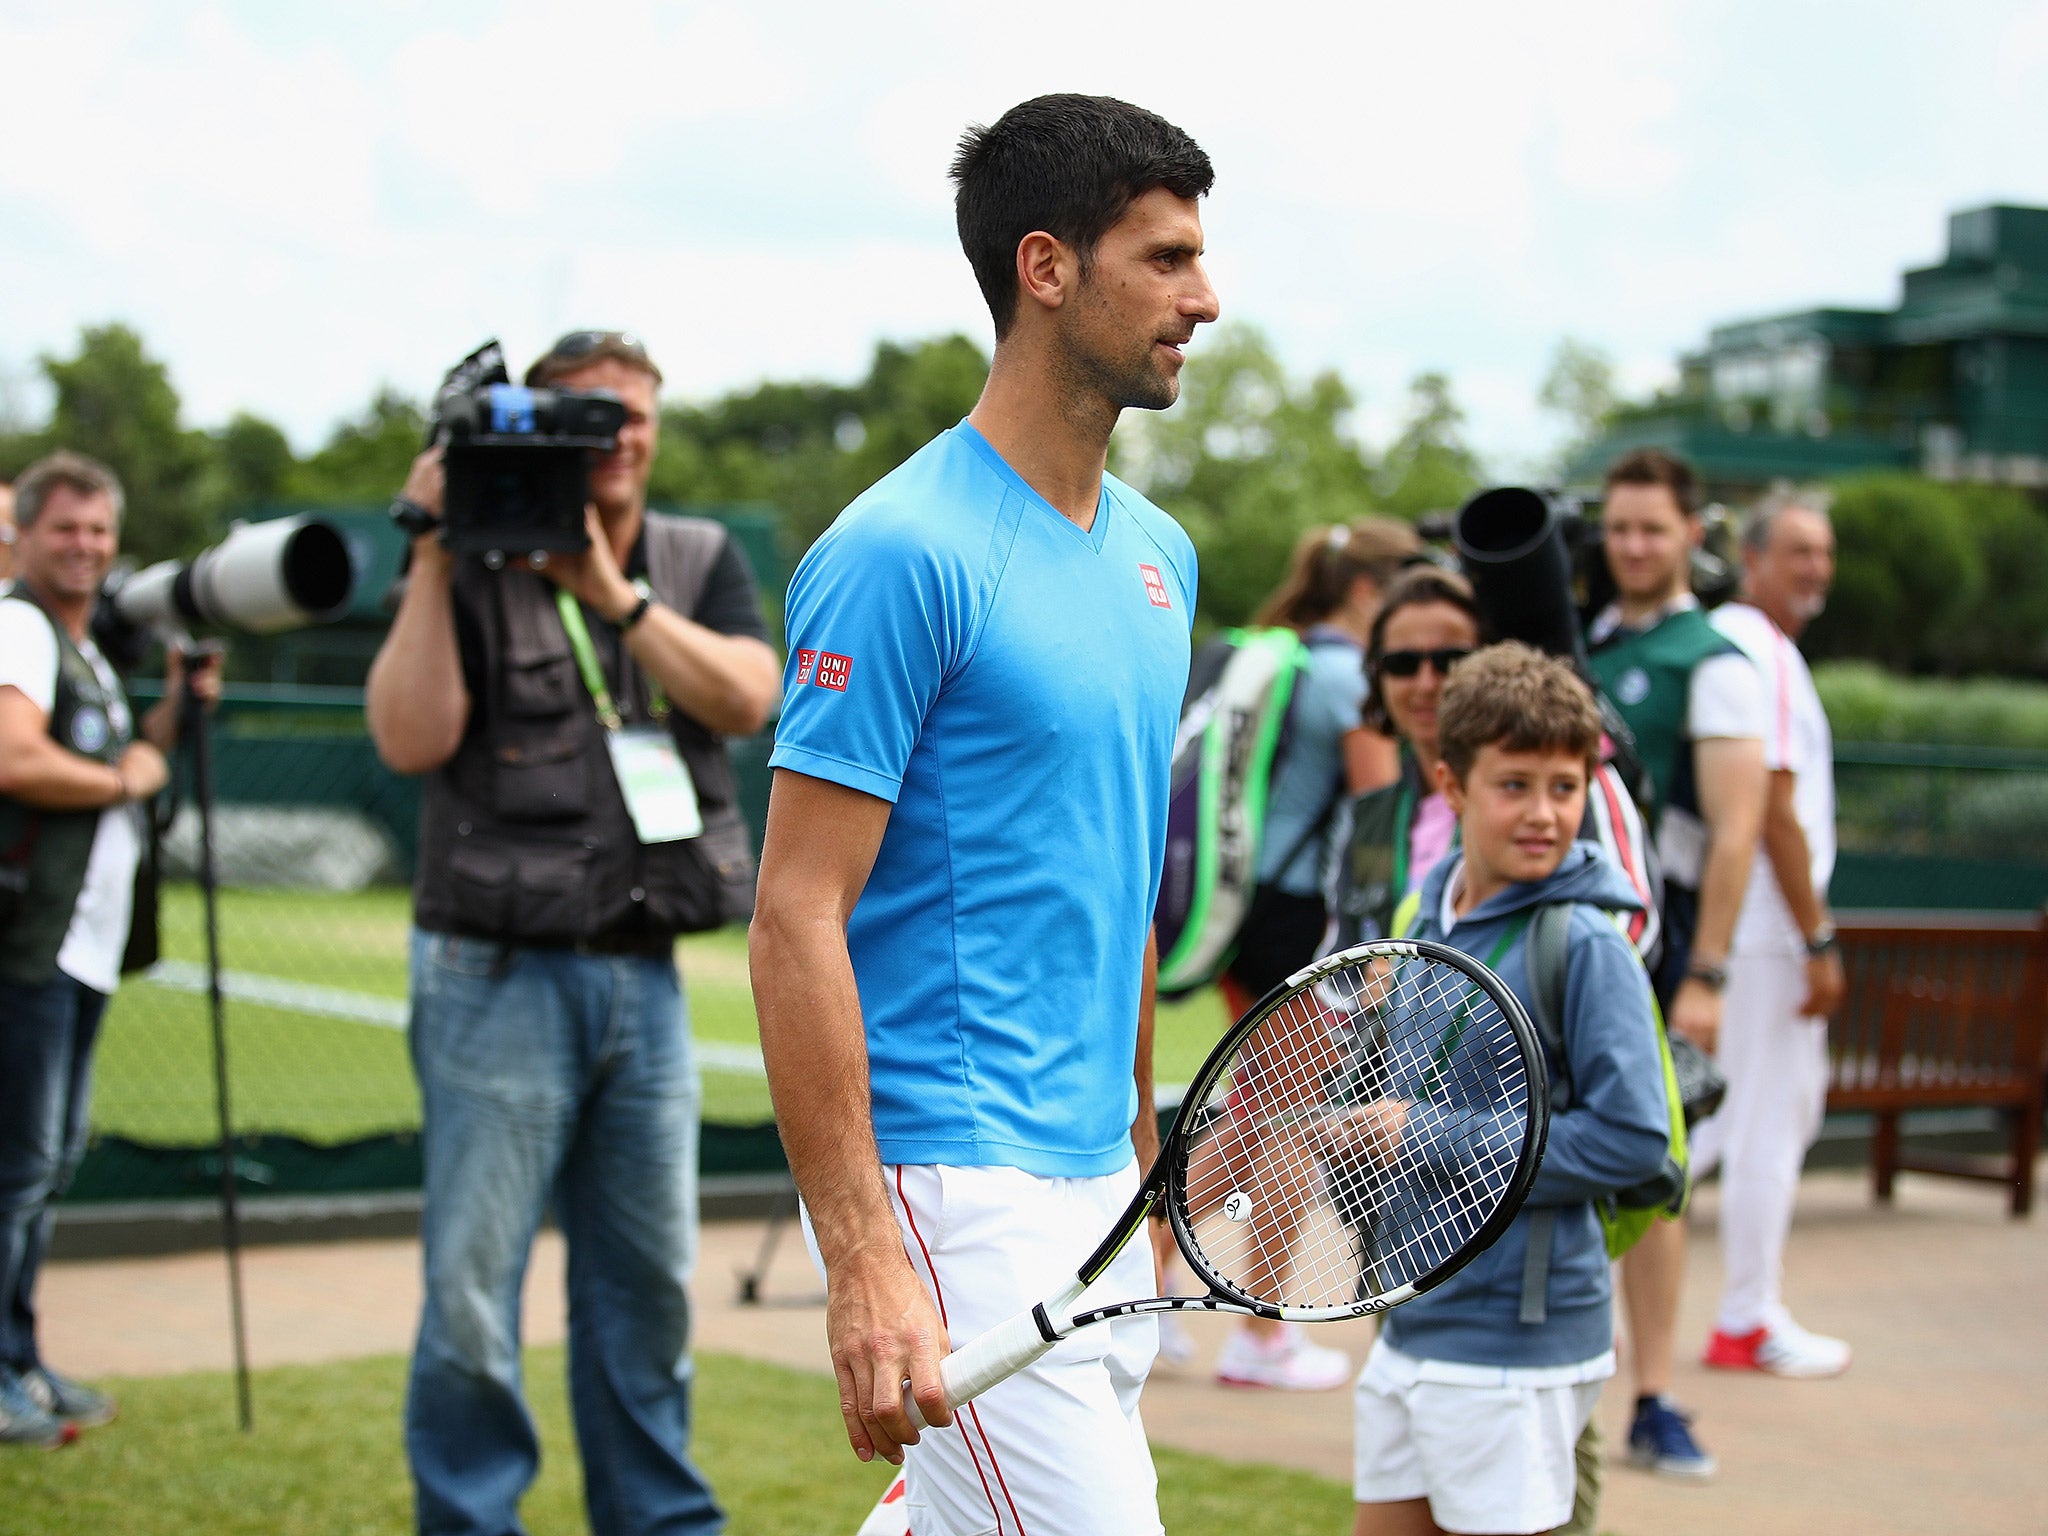 Novak Djokovic is bidding to become the first man to fin five consecutive grand slam titles